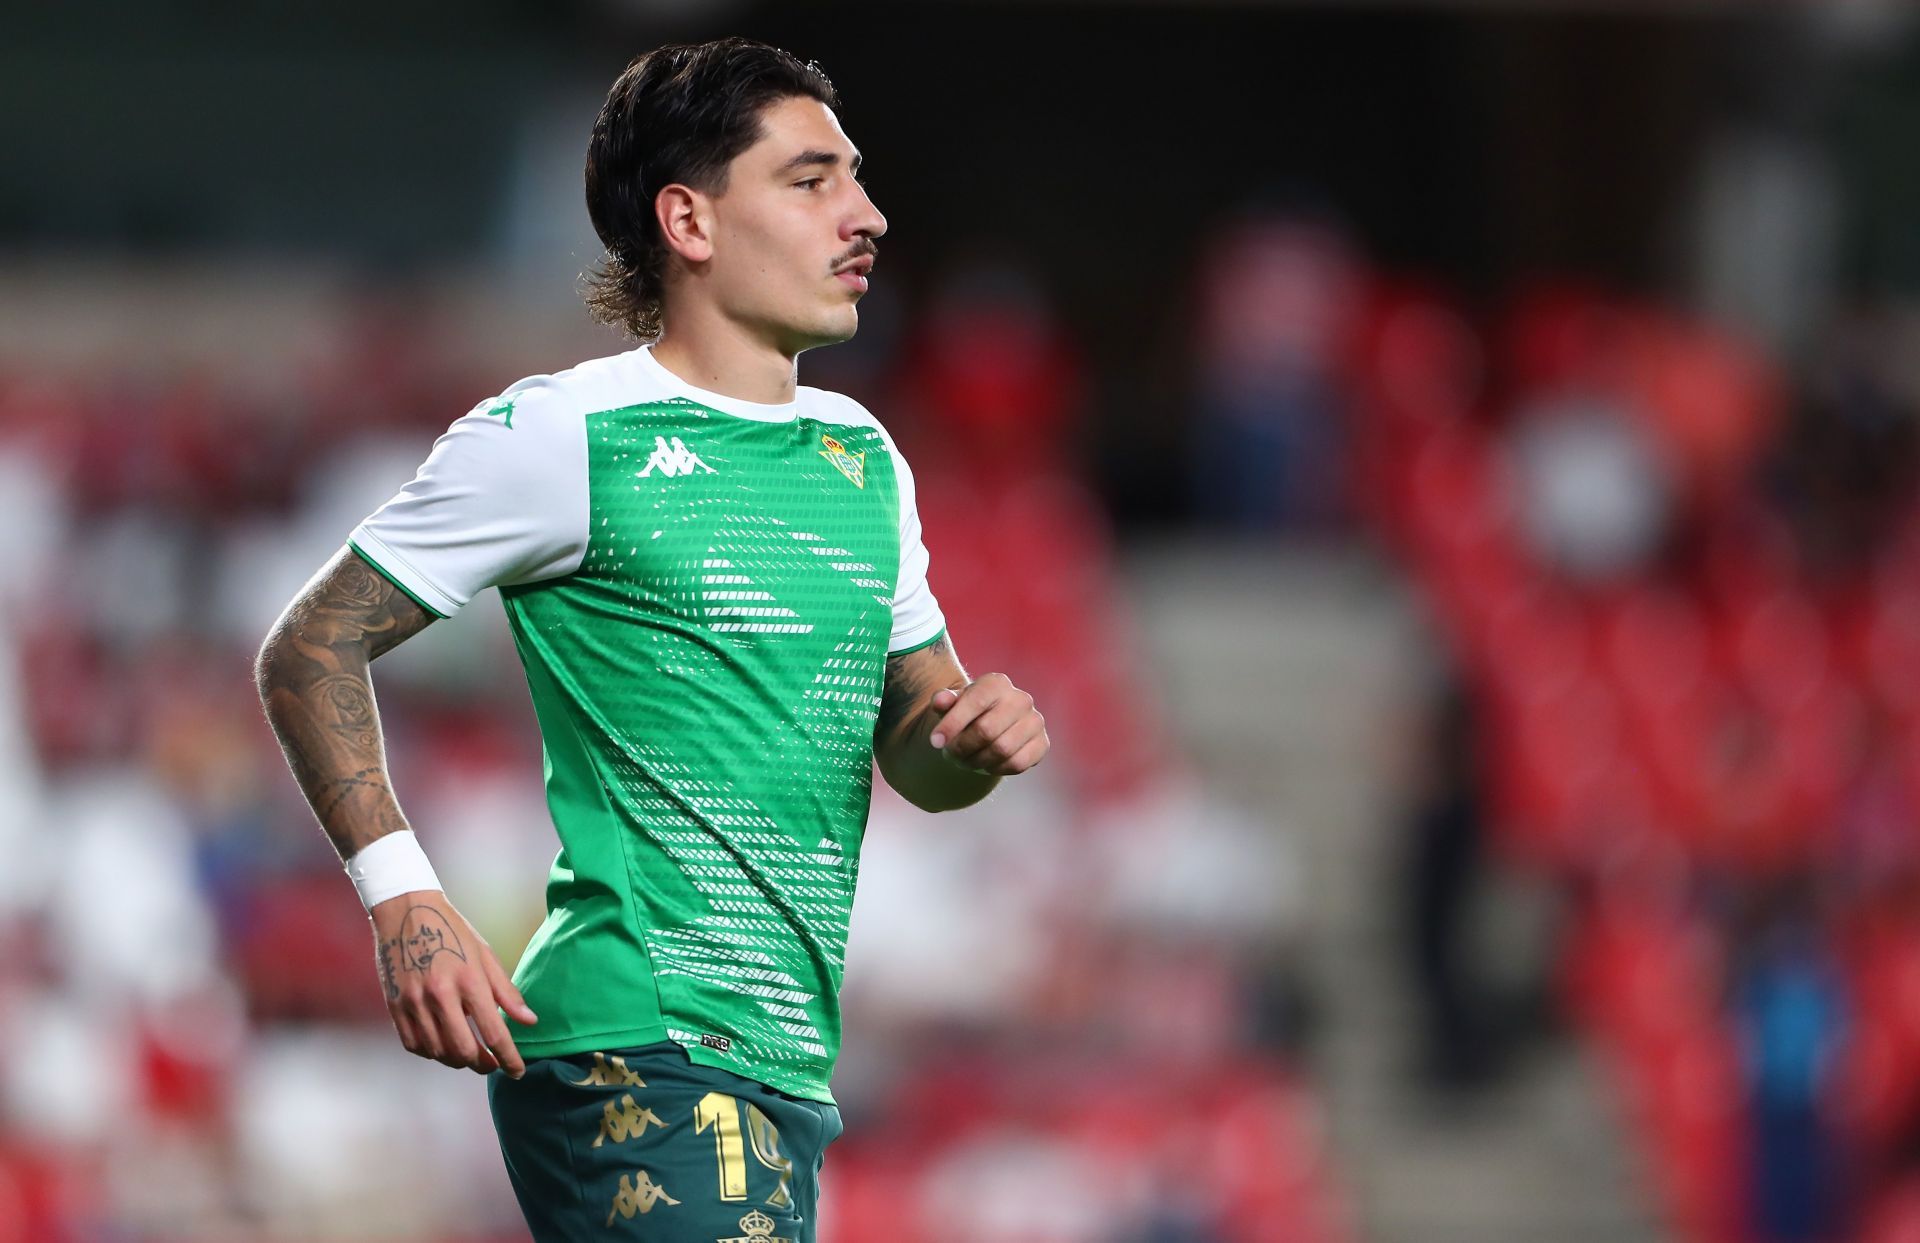 Hector Bellerin in action for Real Betis.